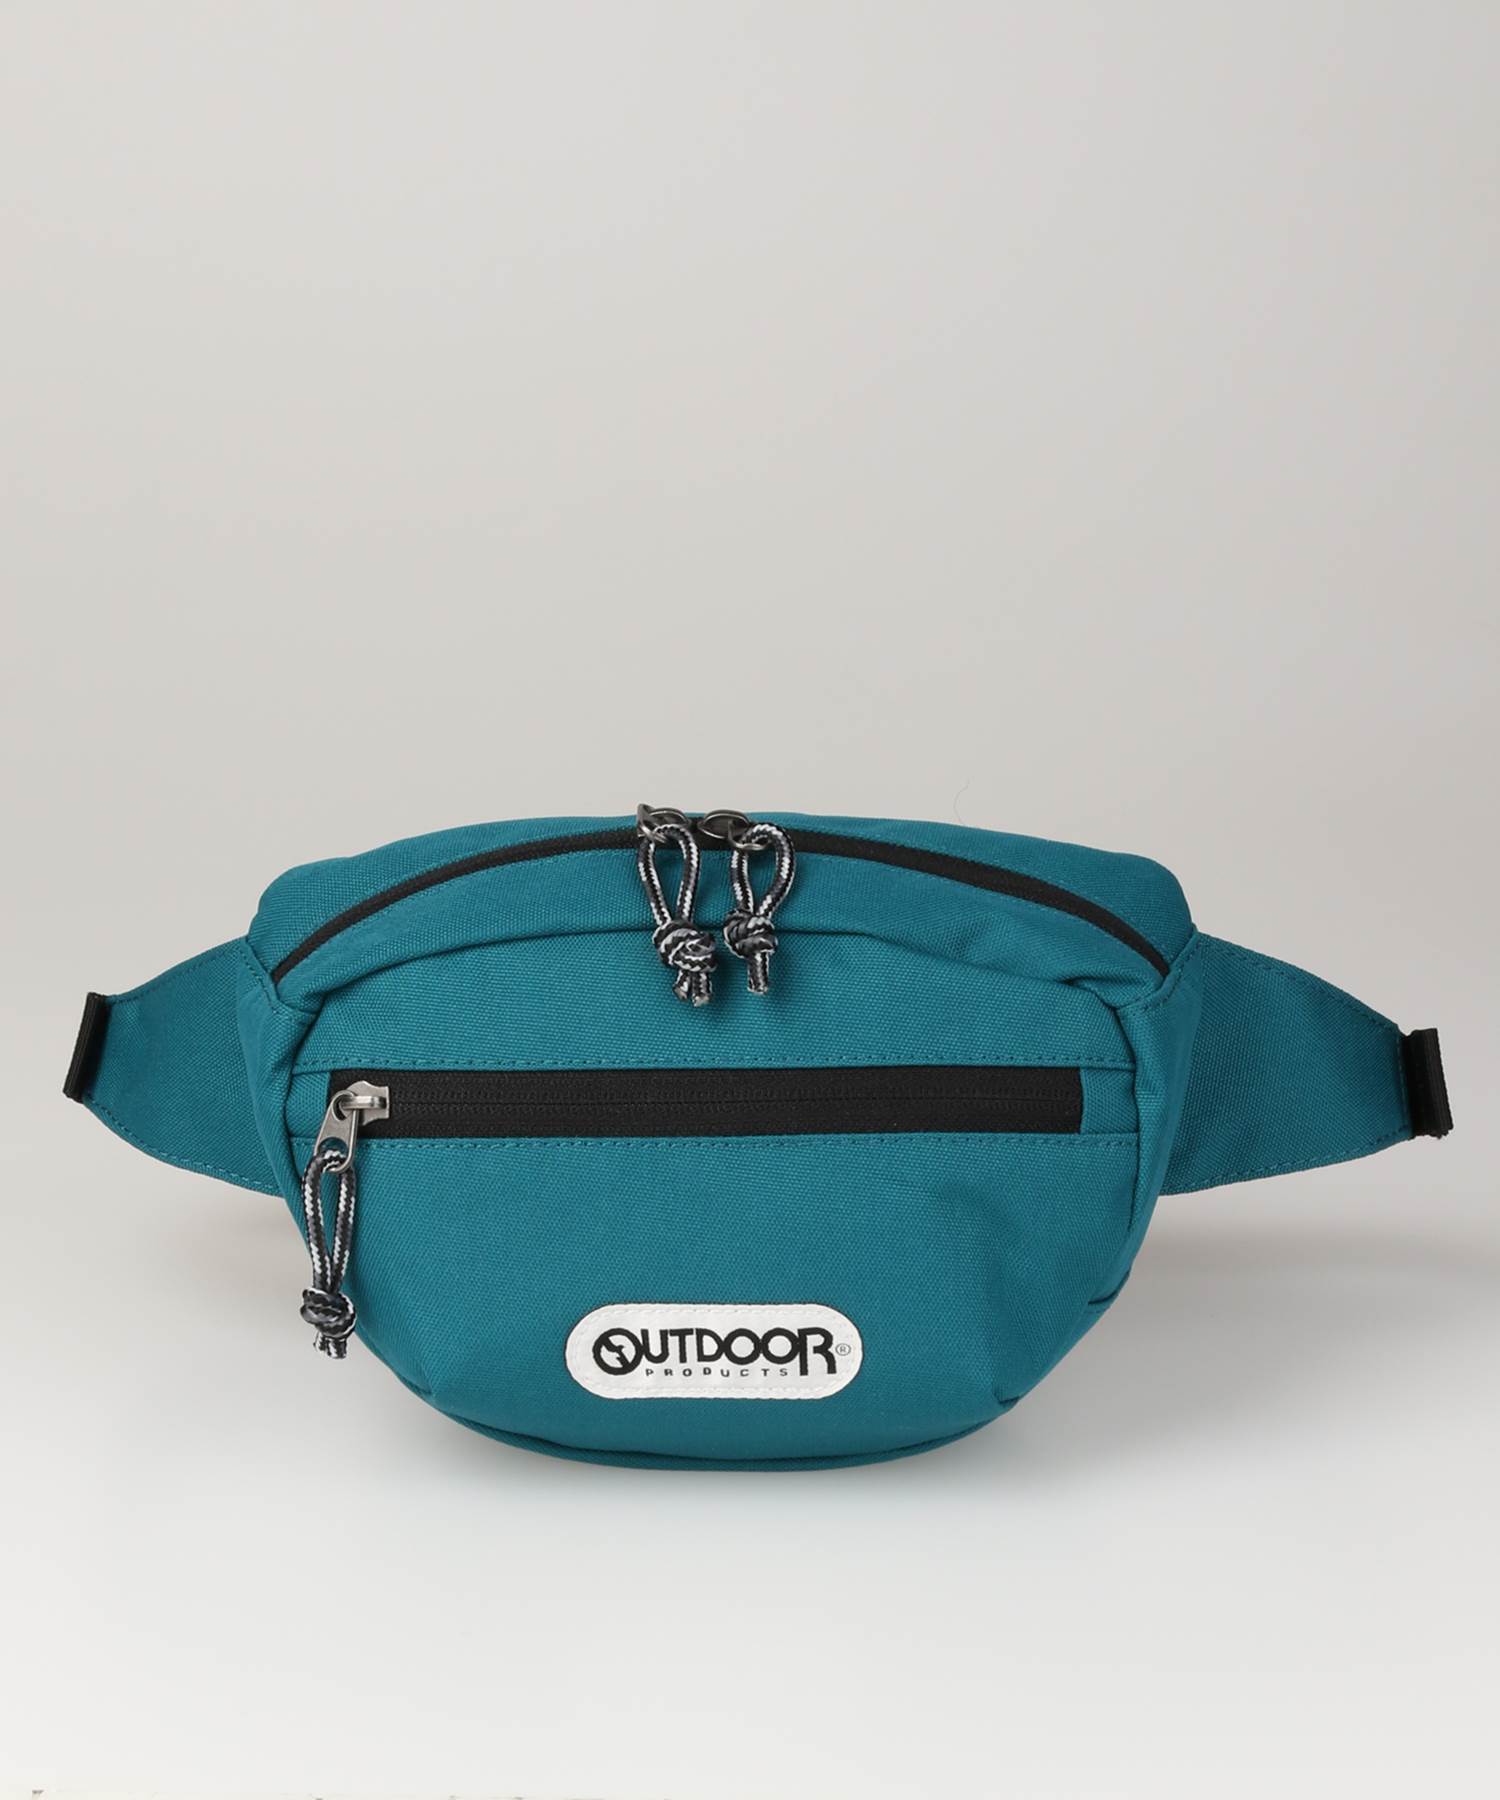 Cypress Hip Bag ヒップバッグ ウエストポーチ Outdoor Products アウトドアプロダクツ Outdoor Products 公式通販サイト